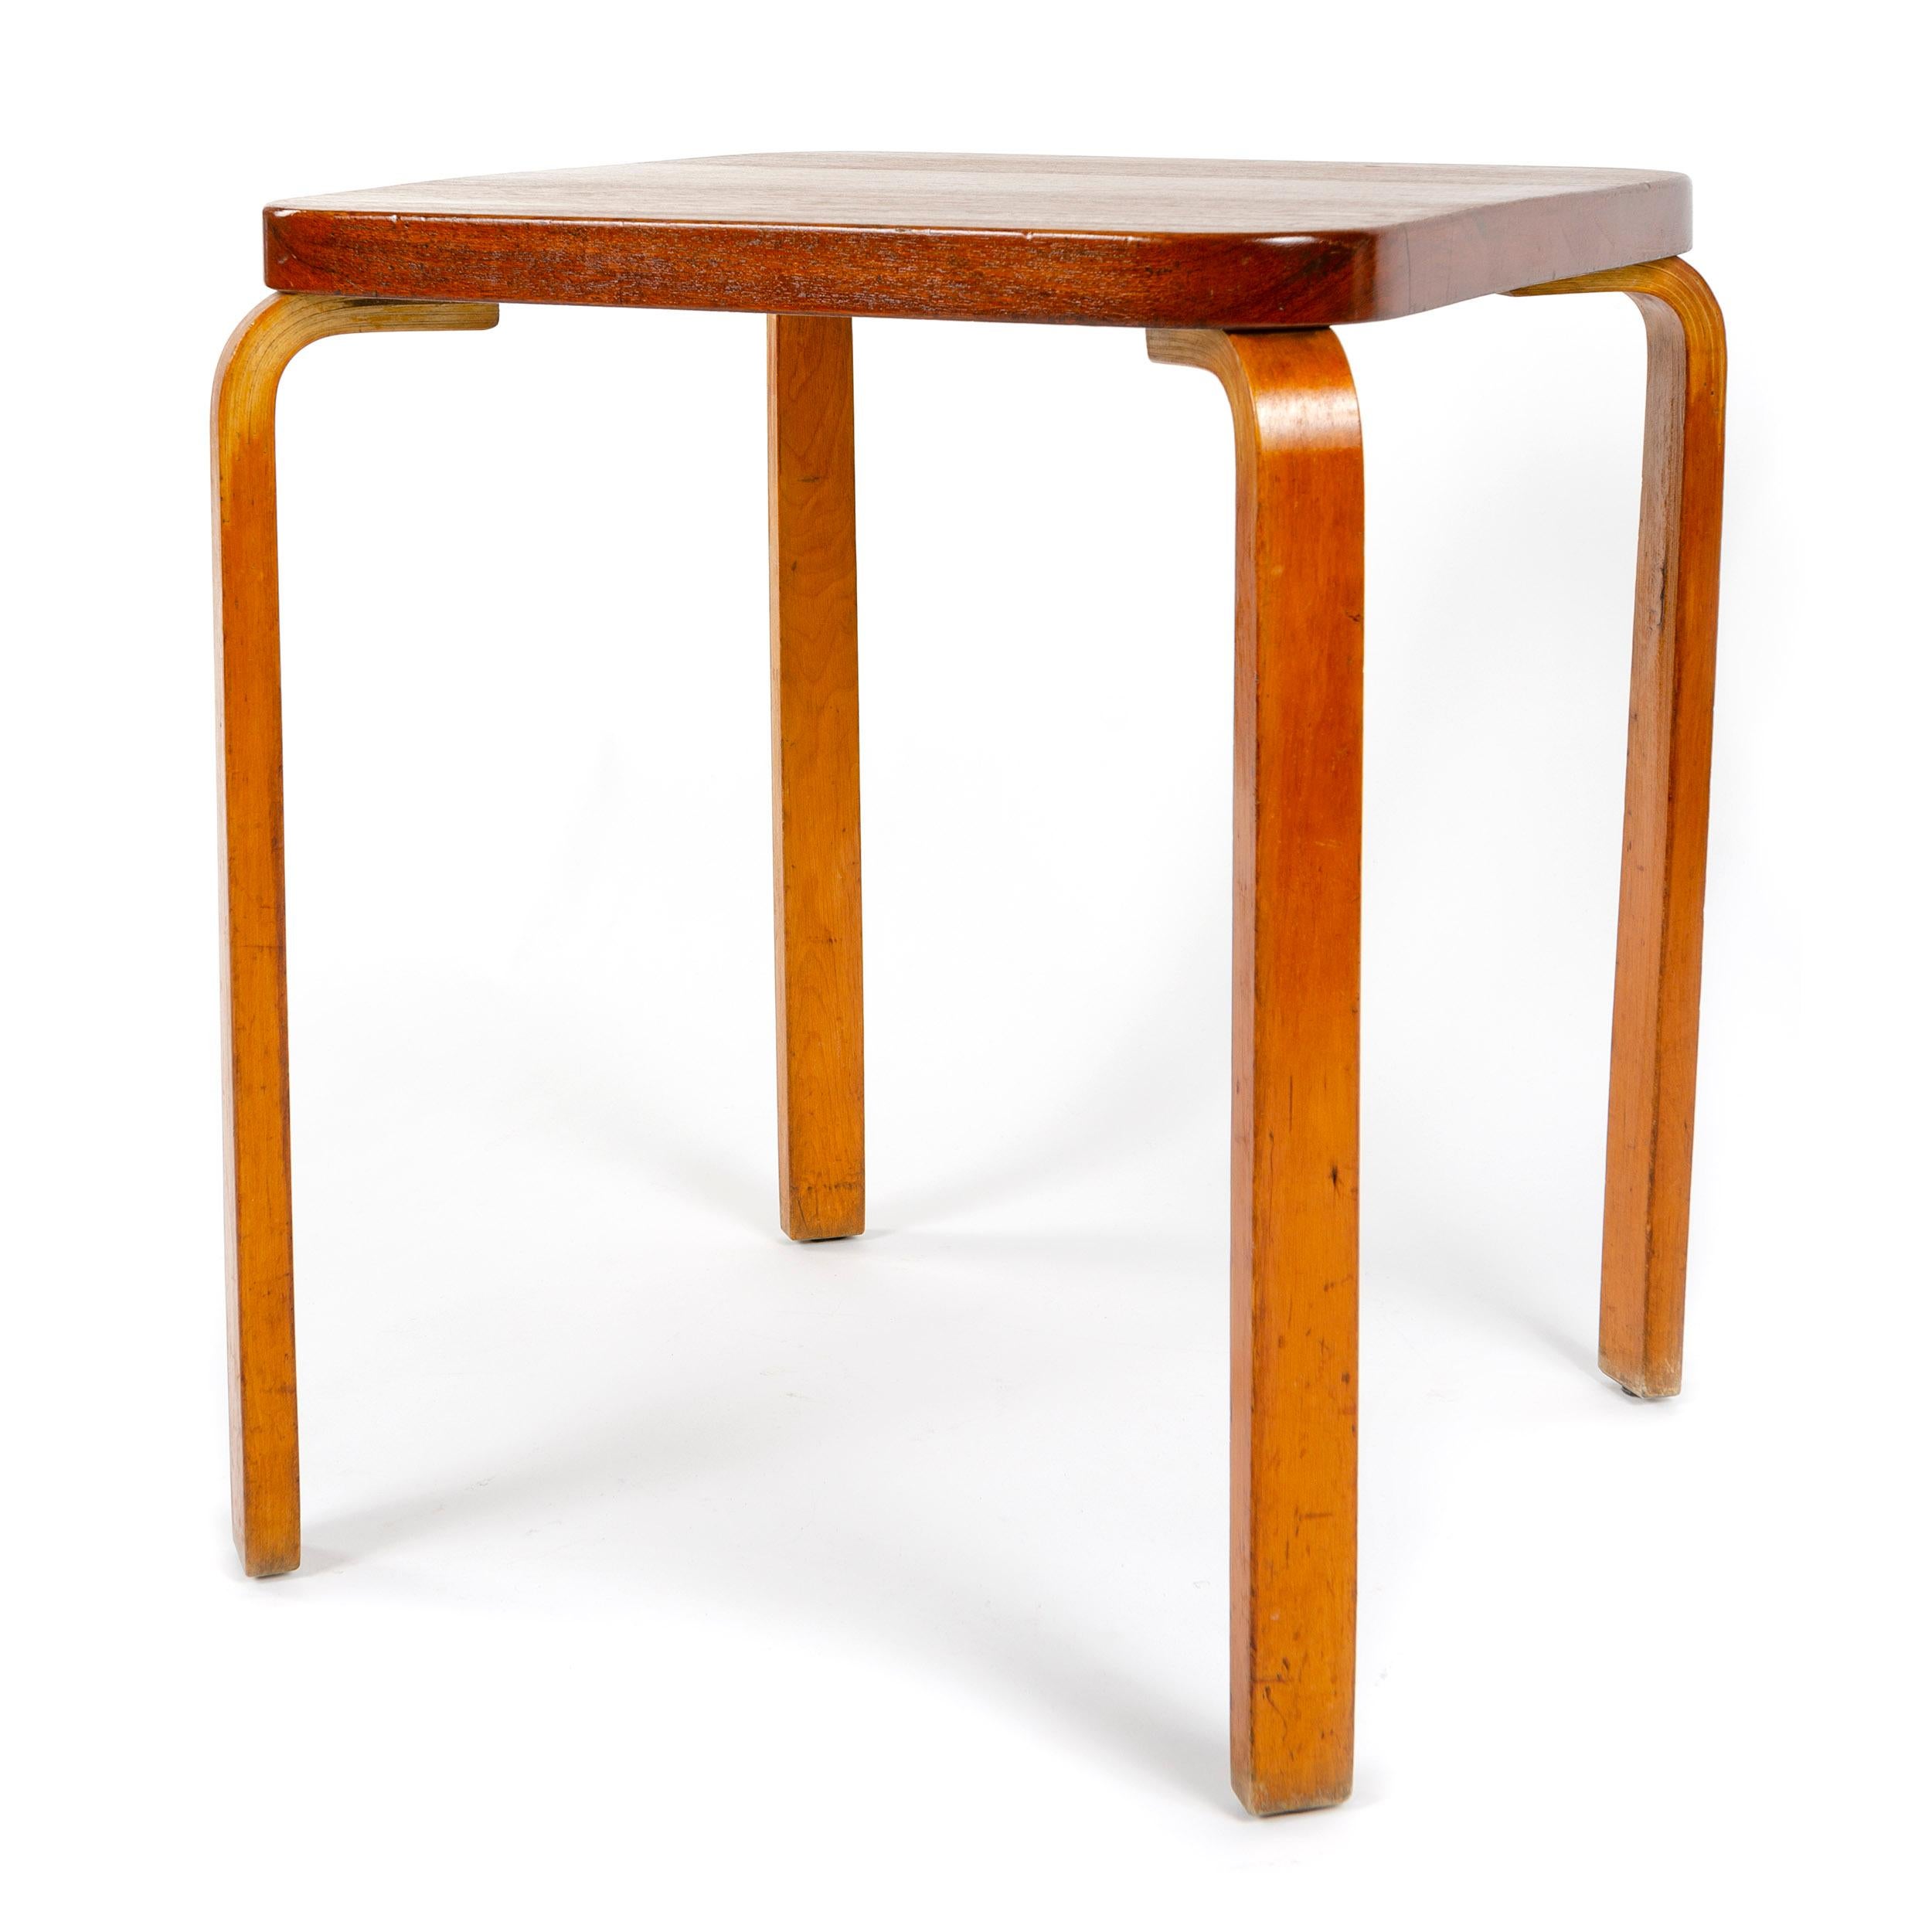 A rare, museum quality, table with a solid teak top on laminated maple legs. Retaining a partial label from the 1939 World's Fair.